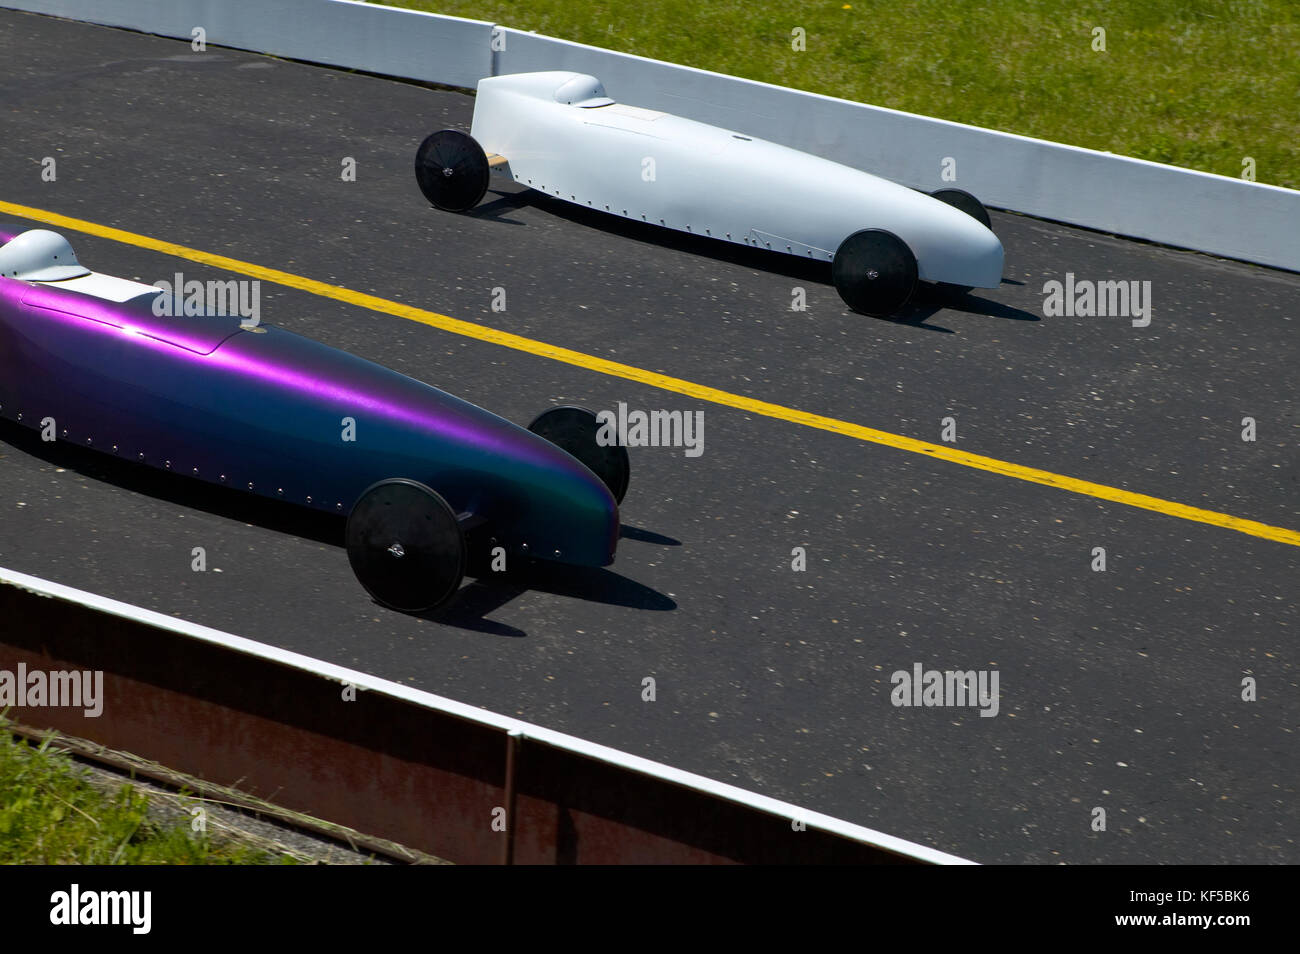 Two cars competing in an American soap box derby race between two unpowered vehicles raced off a ramp in speed trials Stock Photo